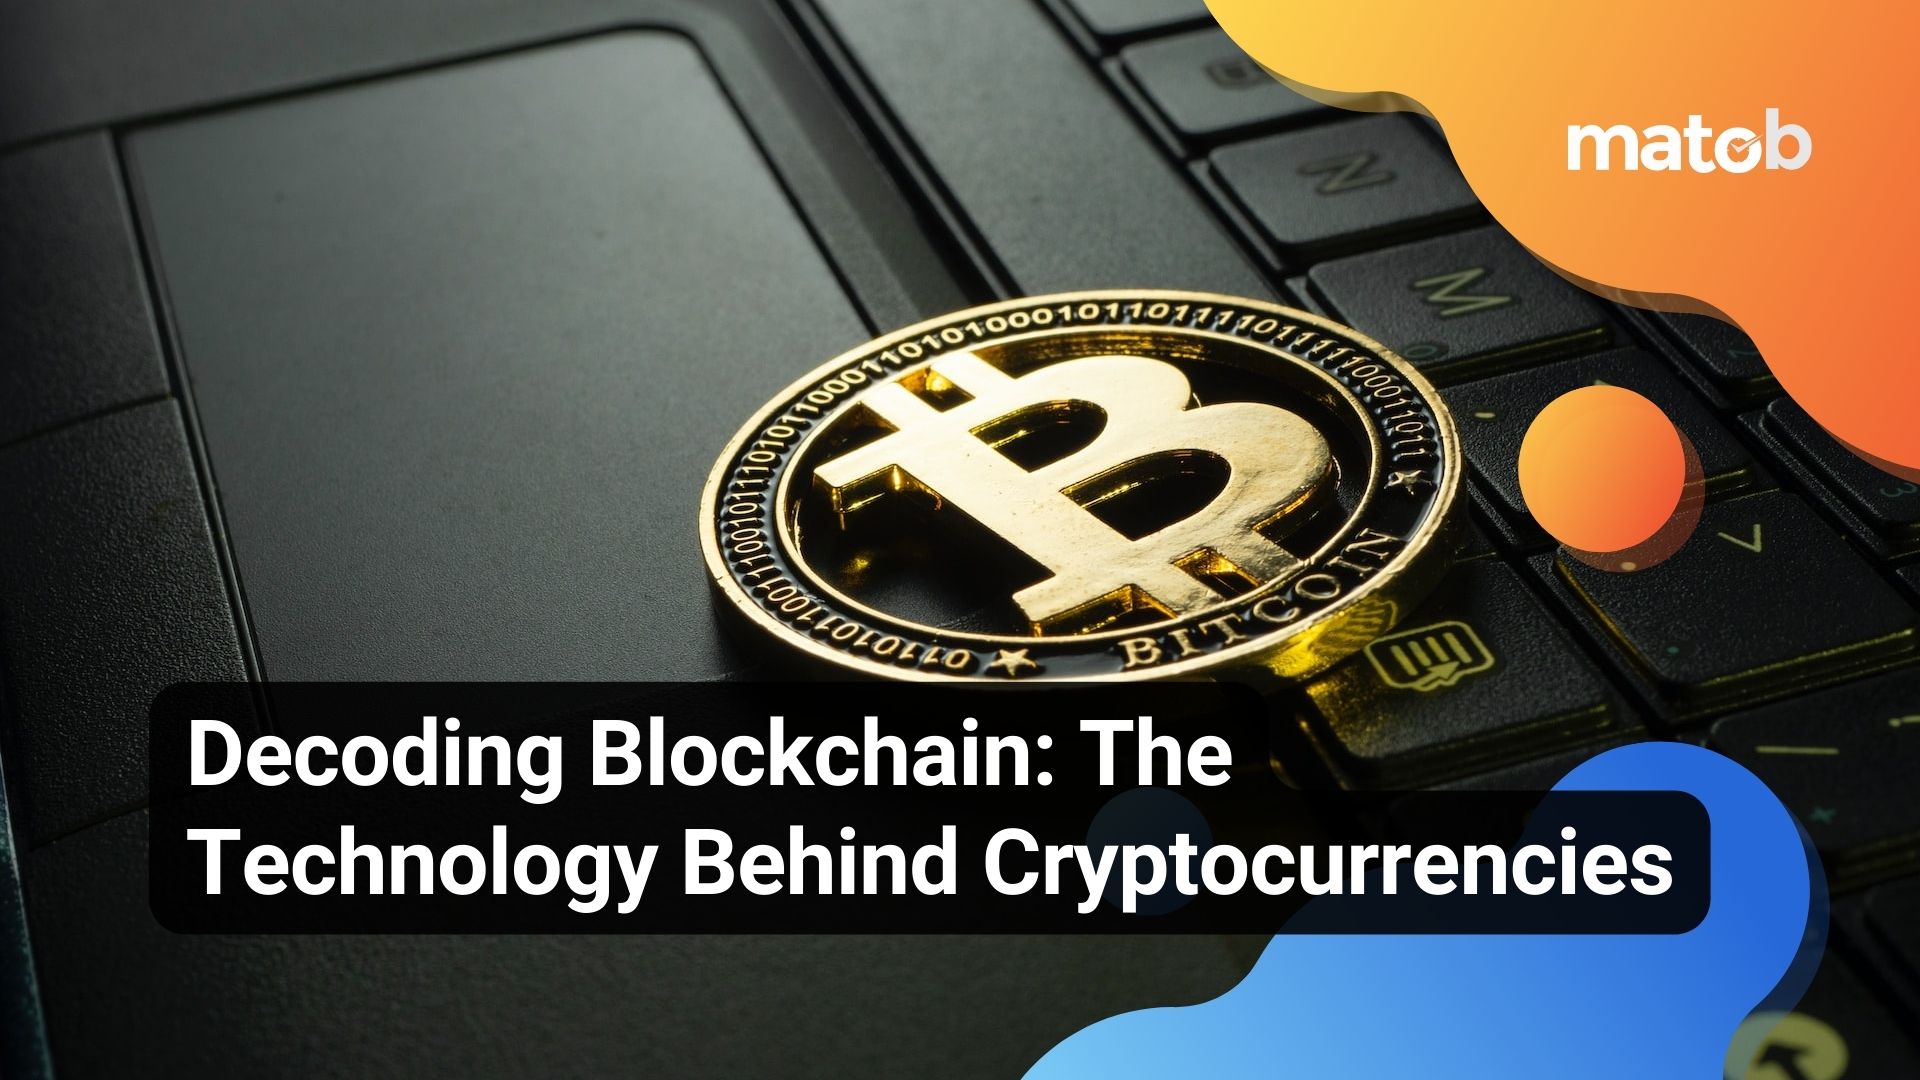 Decoding Blockchain: The Technology Behind Cryptocurrencies